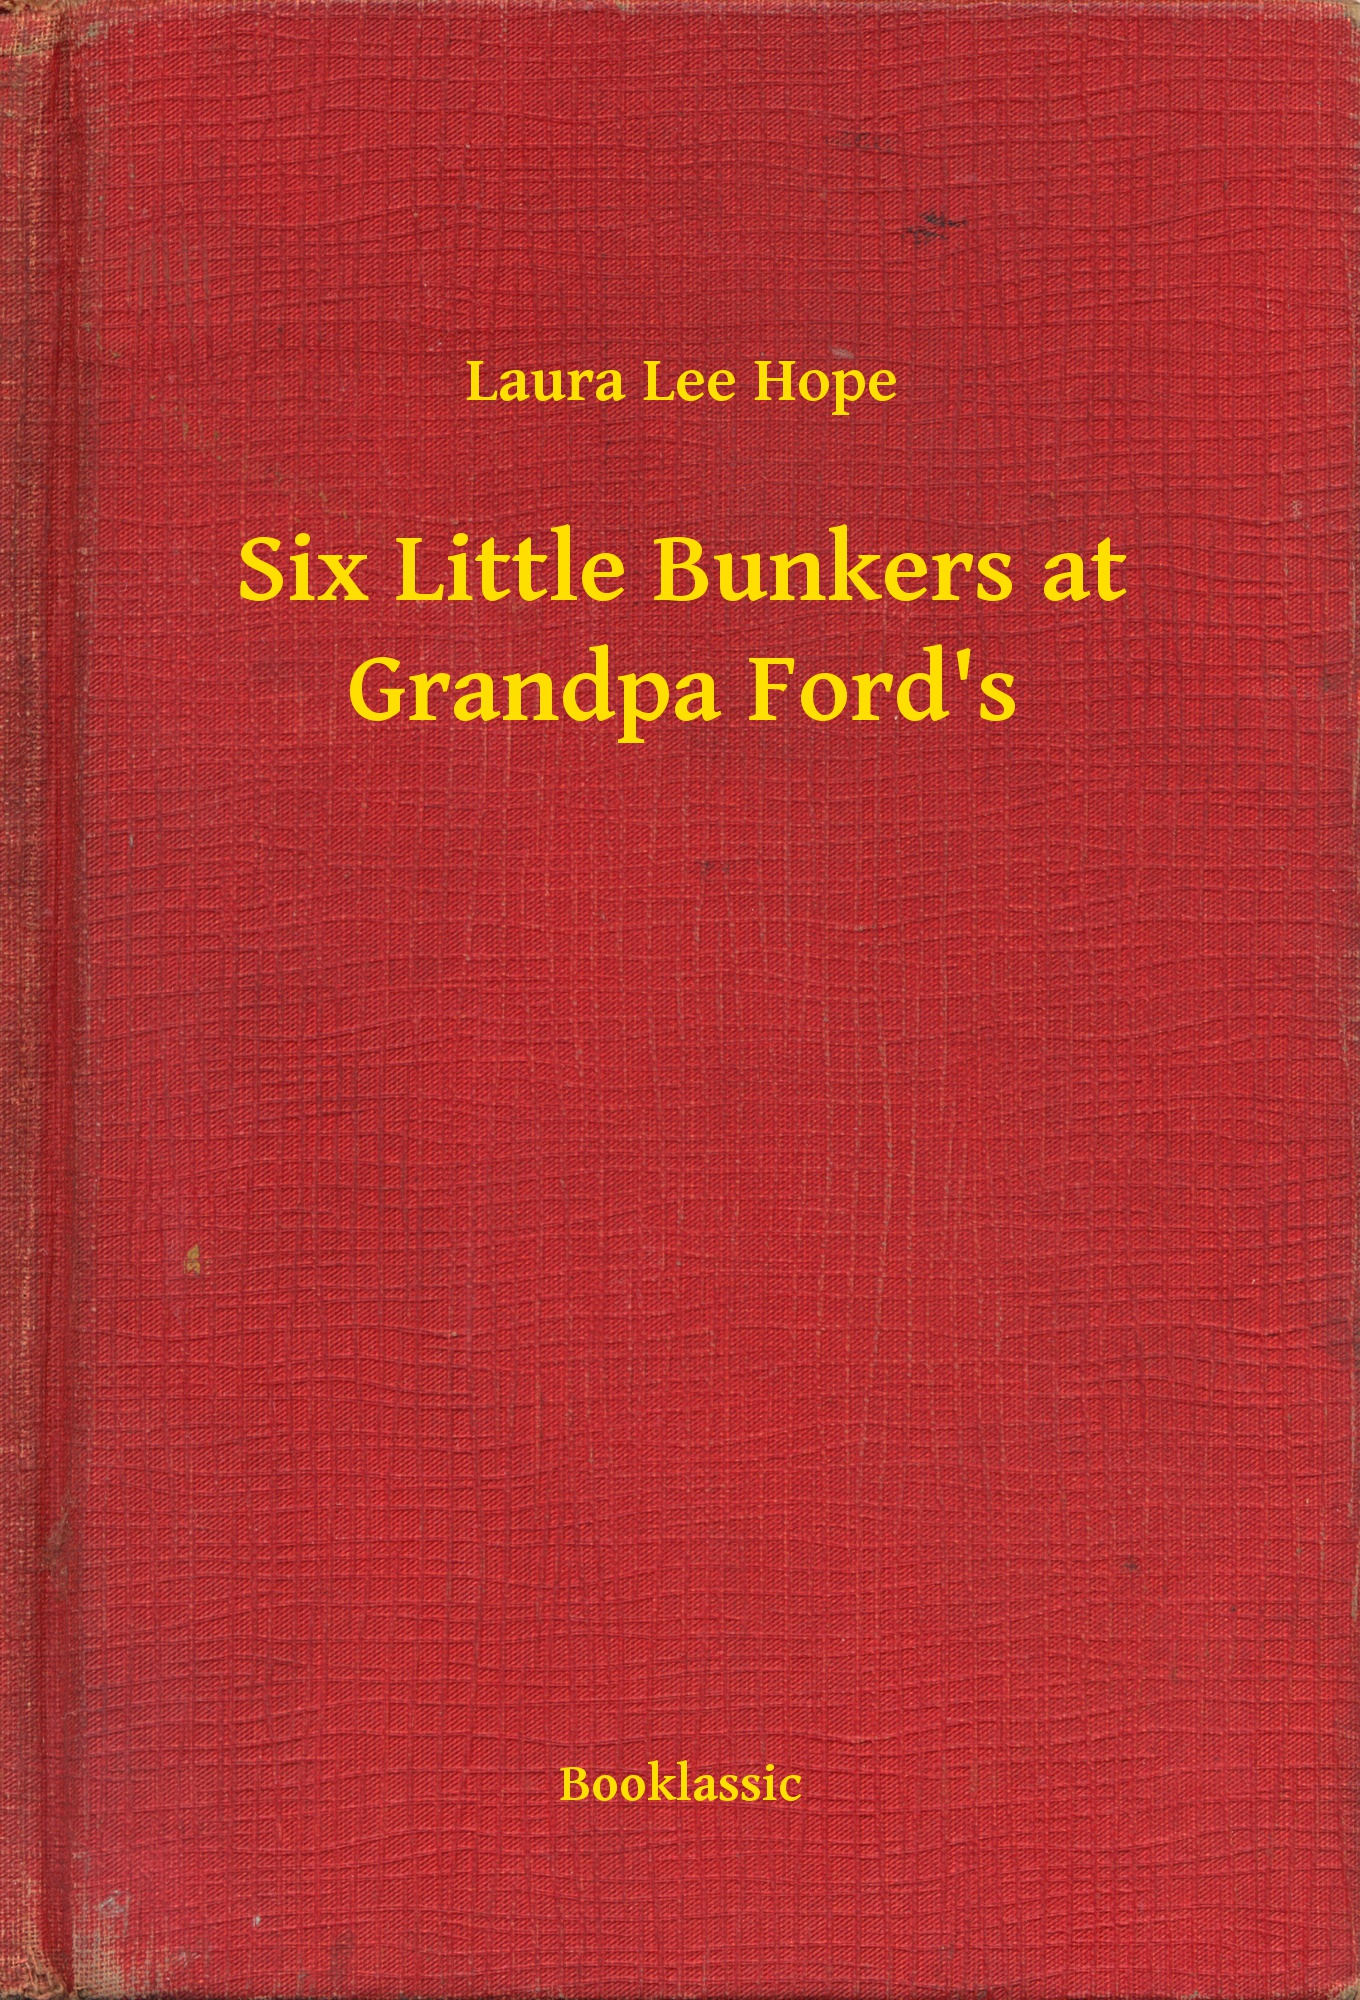 Six Little Bunkers at Grandpa Ford"s